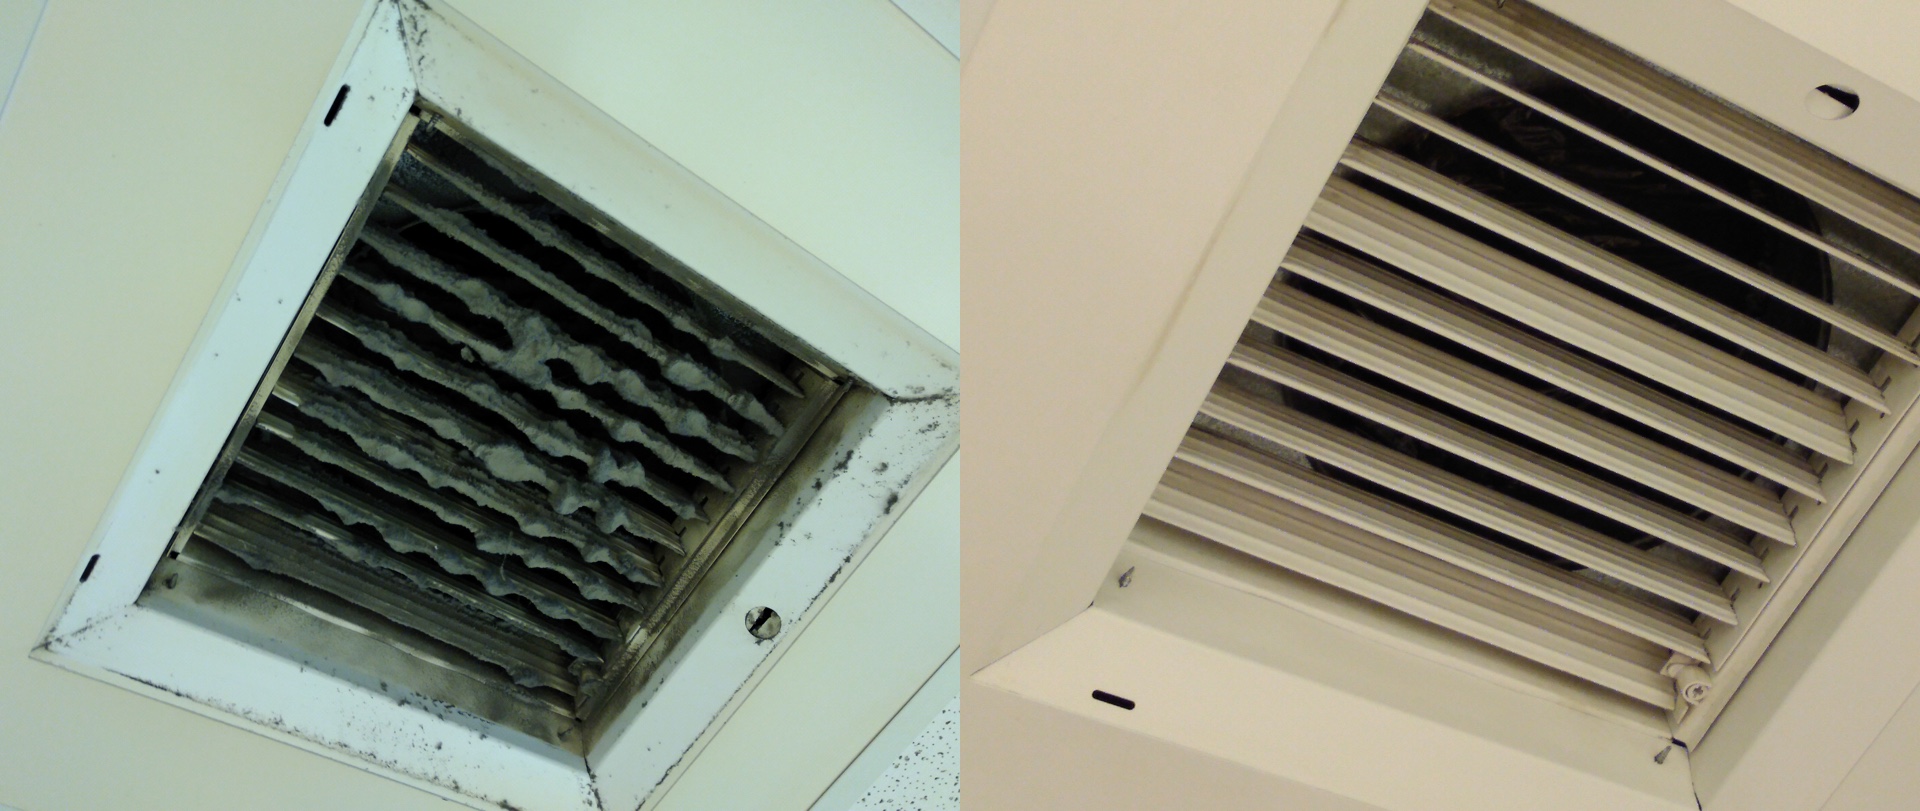  Air Duct Cleaning In 2022  La Porte TX